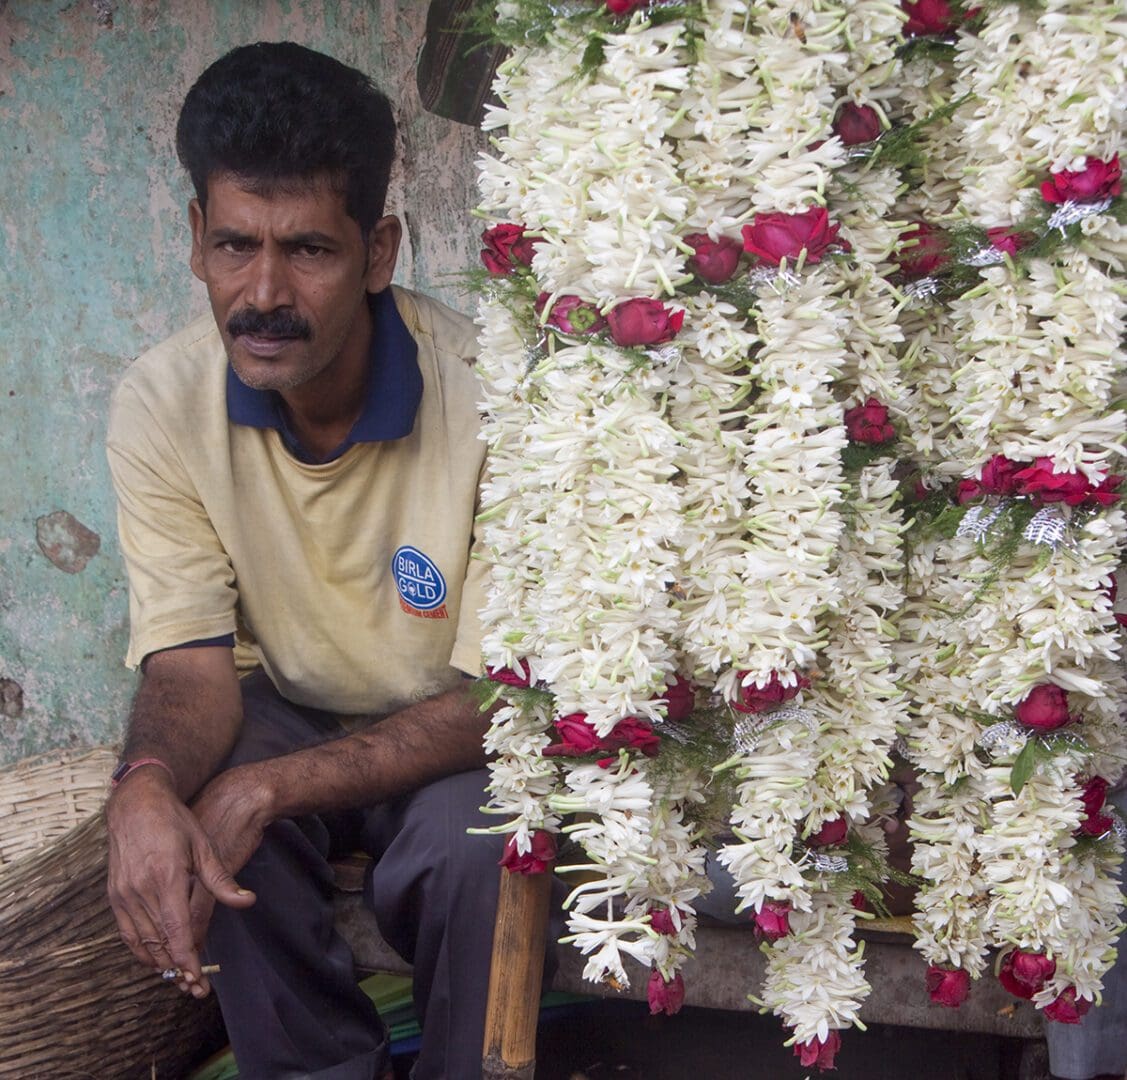 A man sitting in front of a display of flowers.